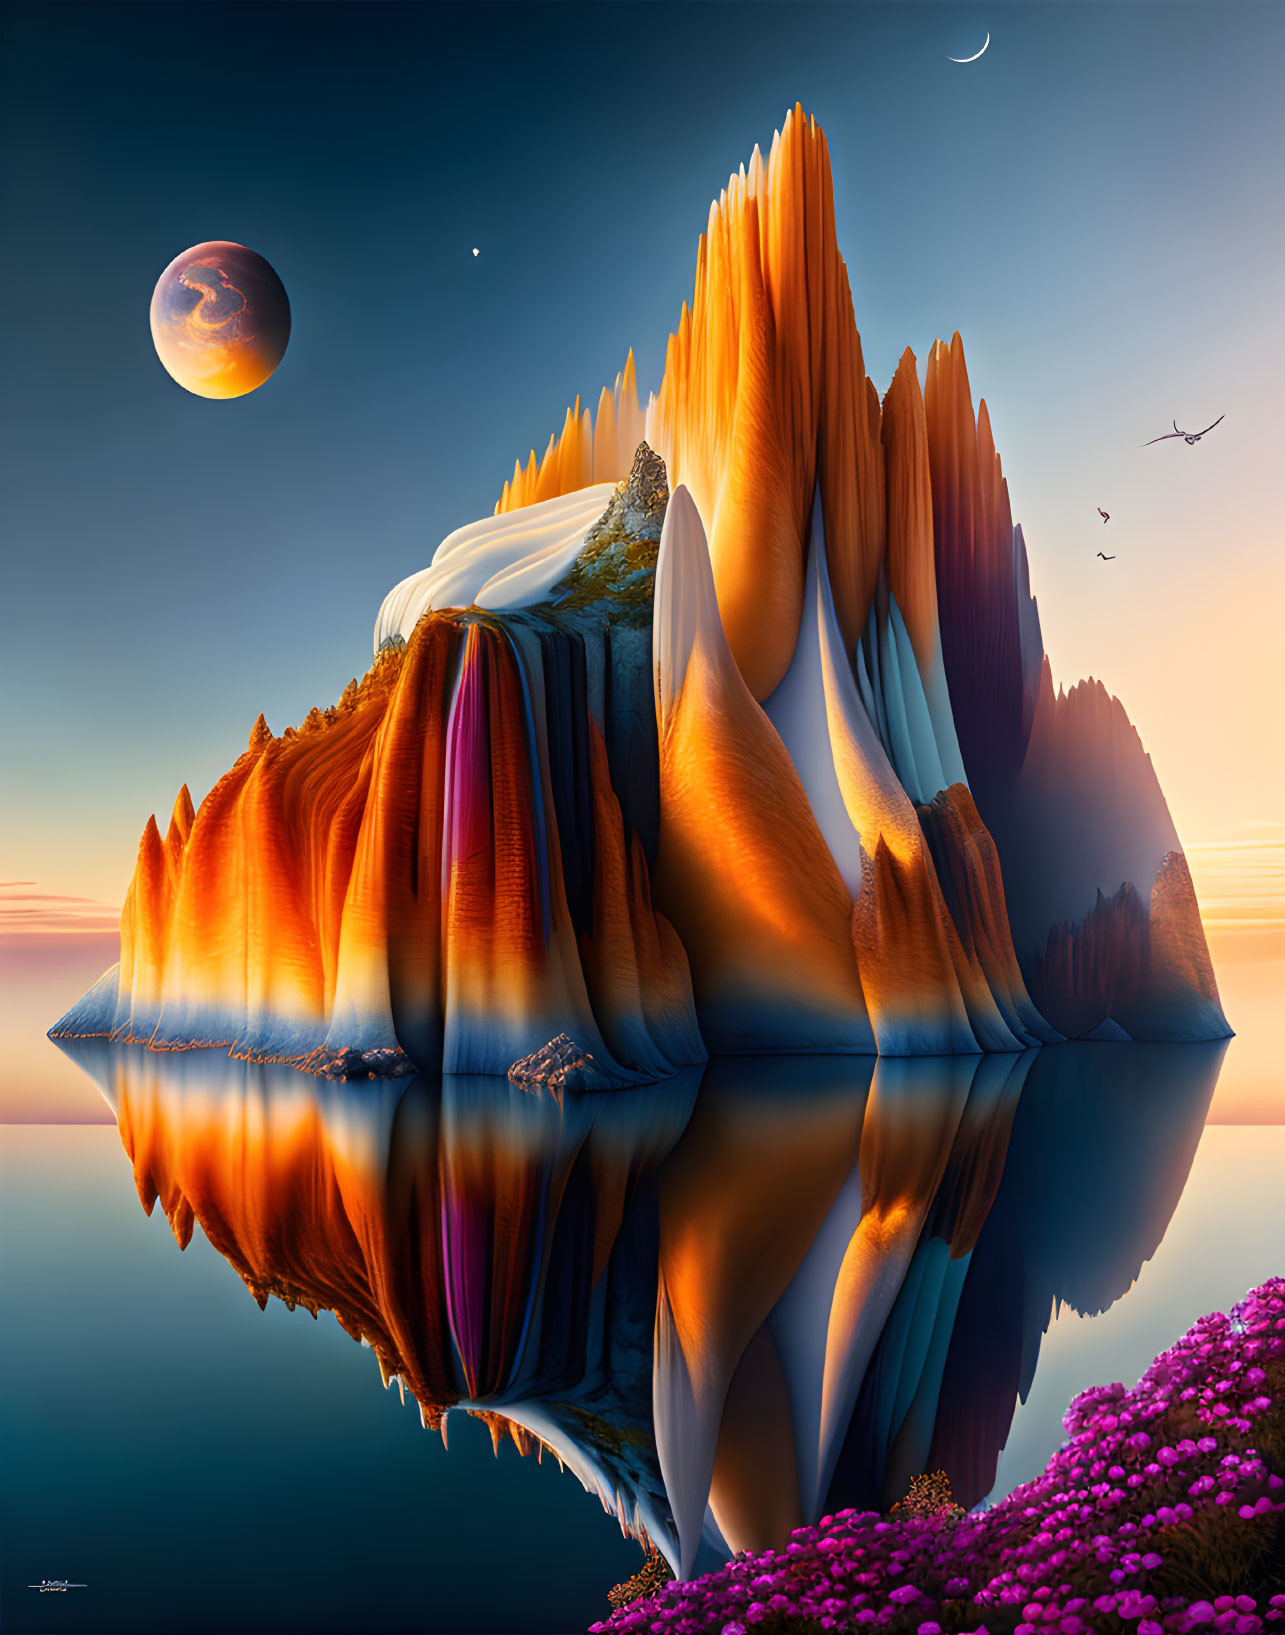 Vibrant rock formations reflected in still waters under twilight sky